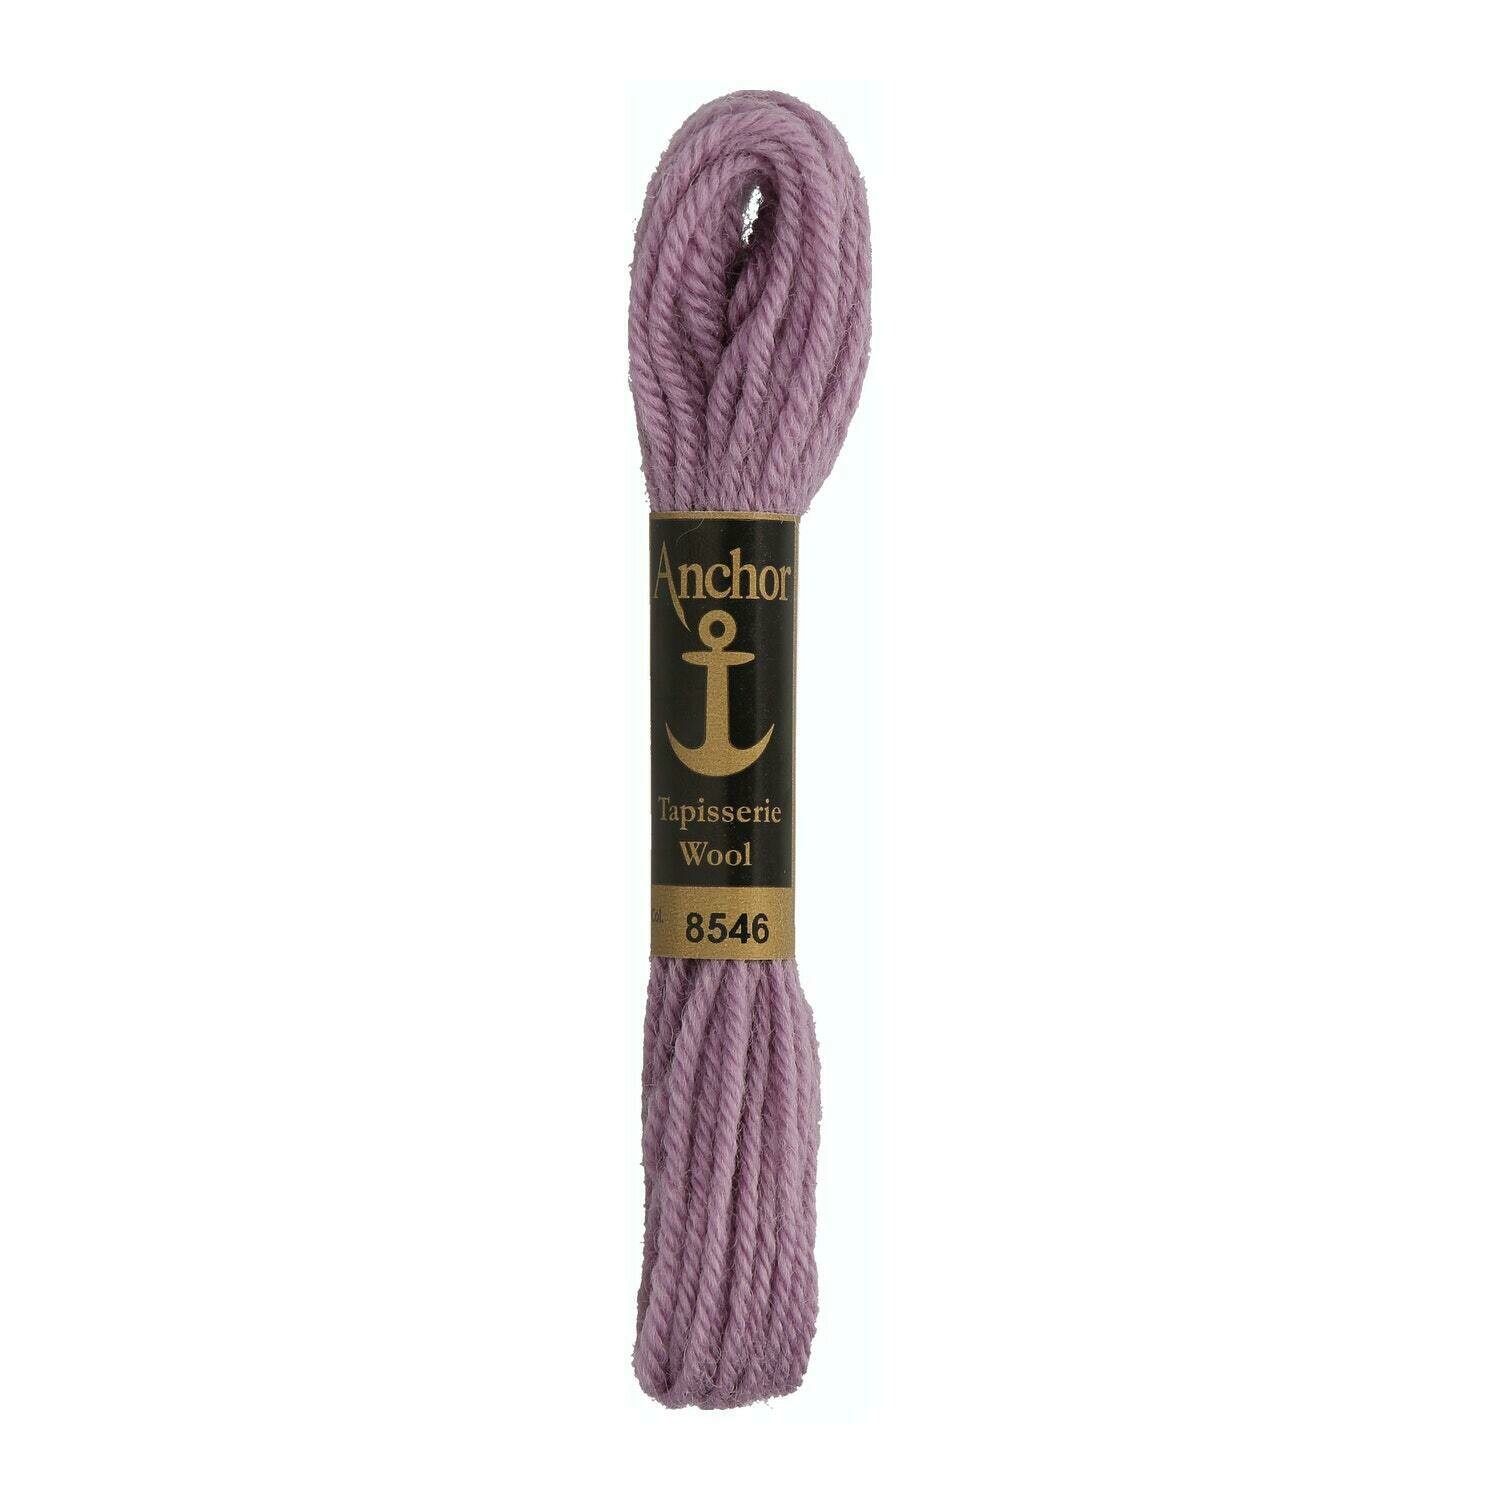 Anchor Tapisserie Wool #08546